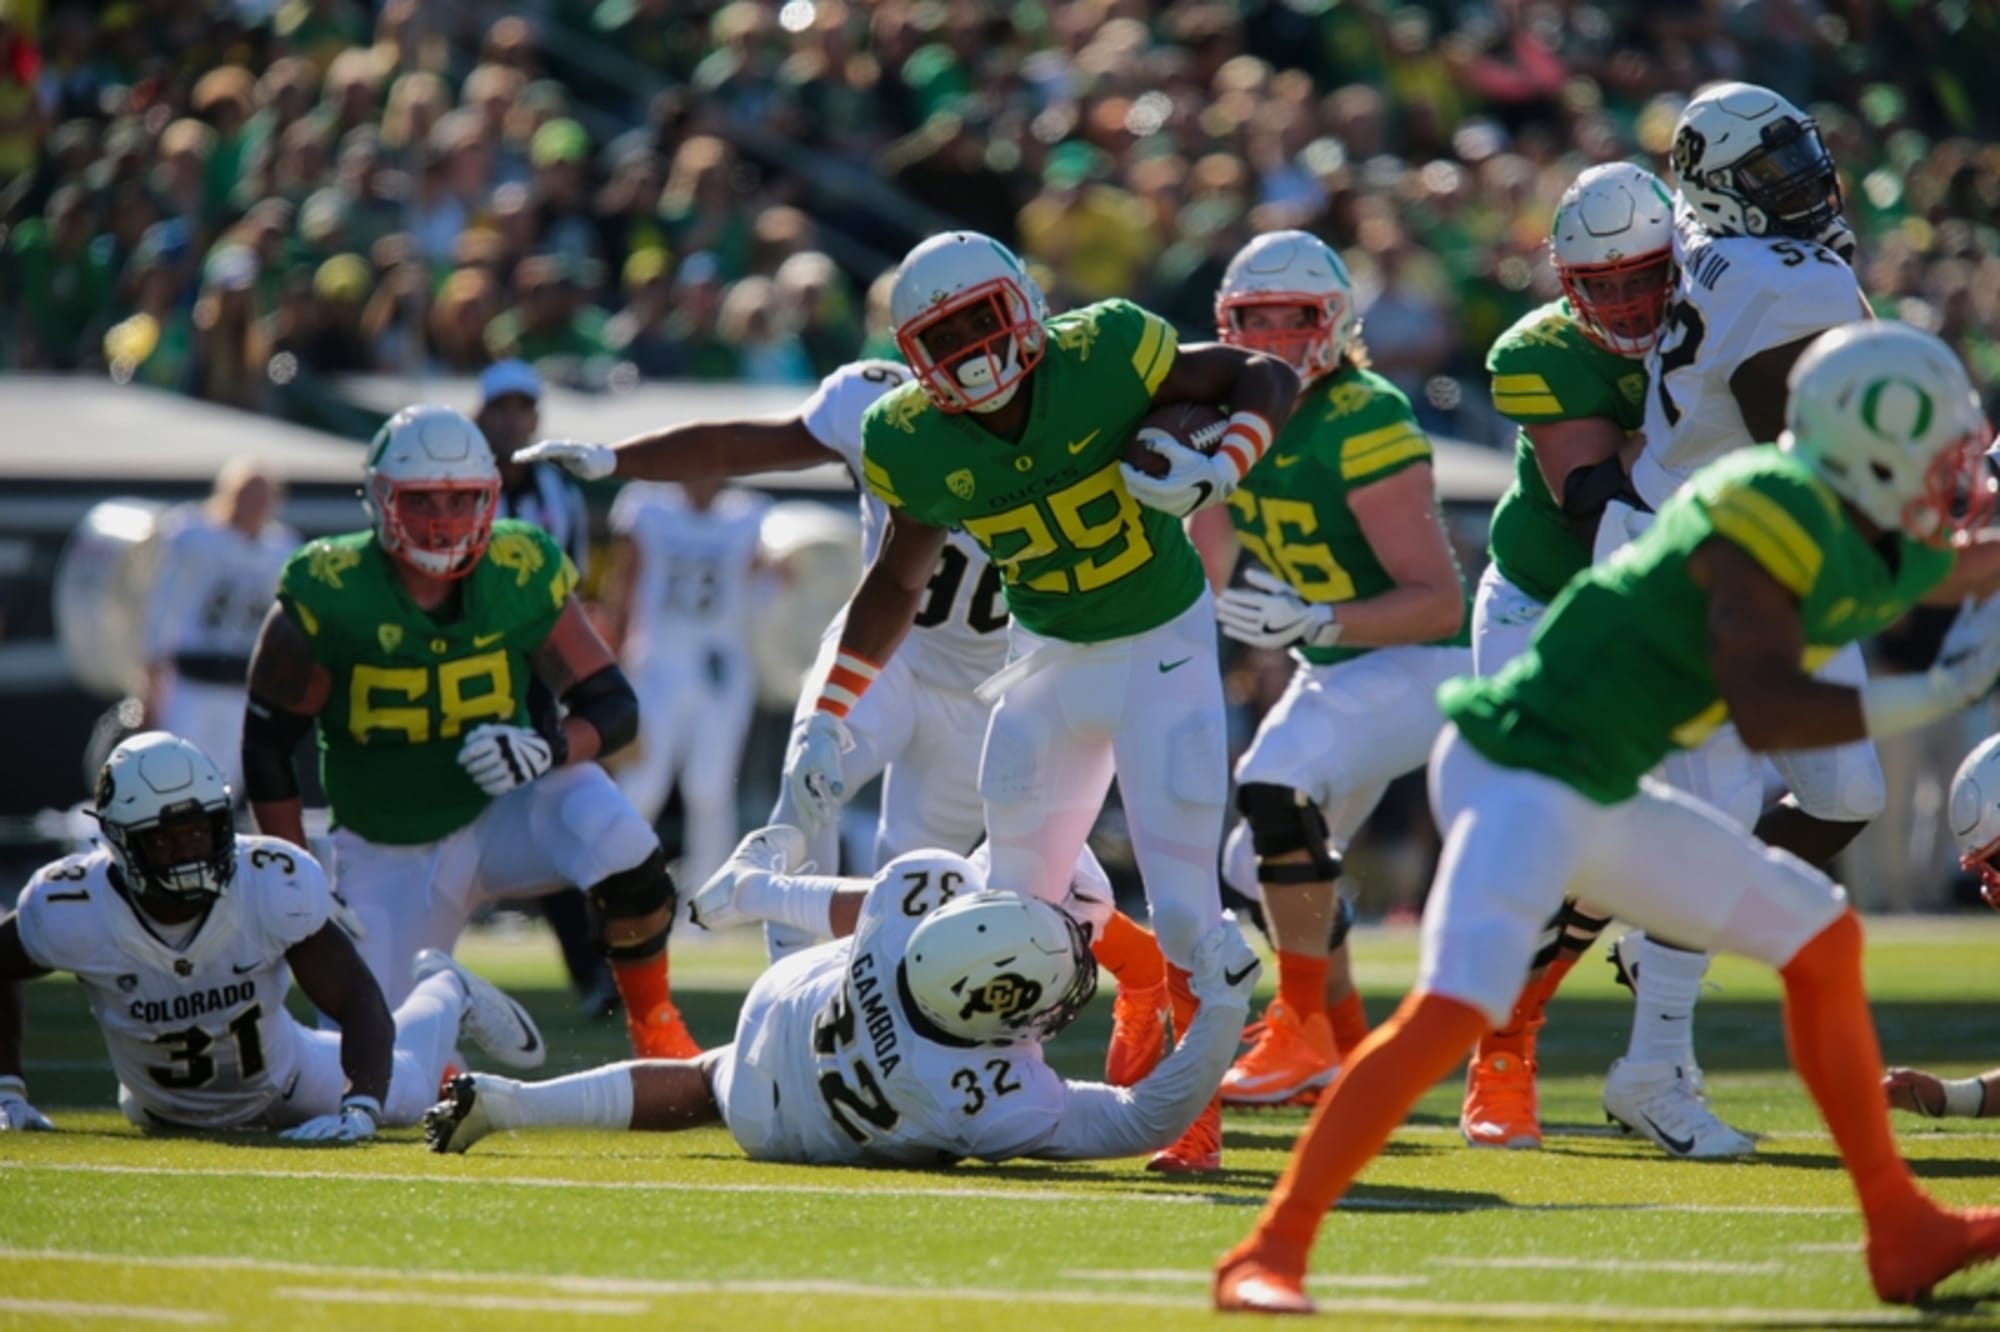 The Oregon Ducks' latest crazy football uniforms are designed to look like,  well, ducks